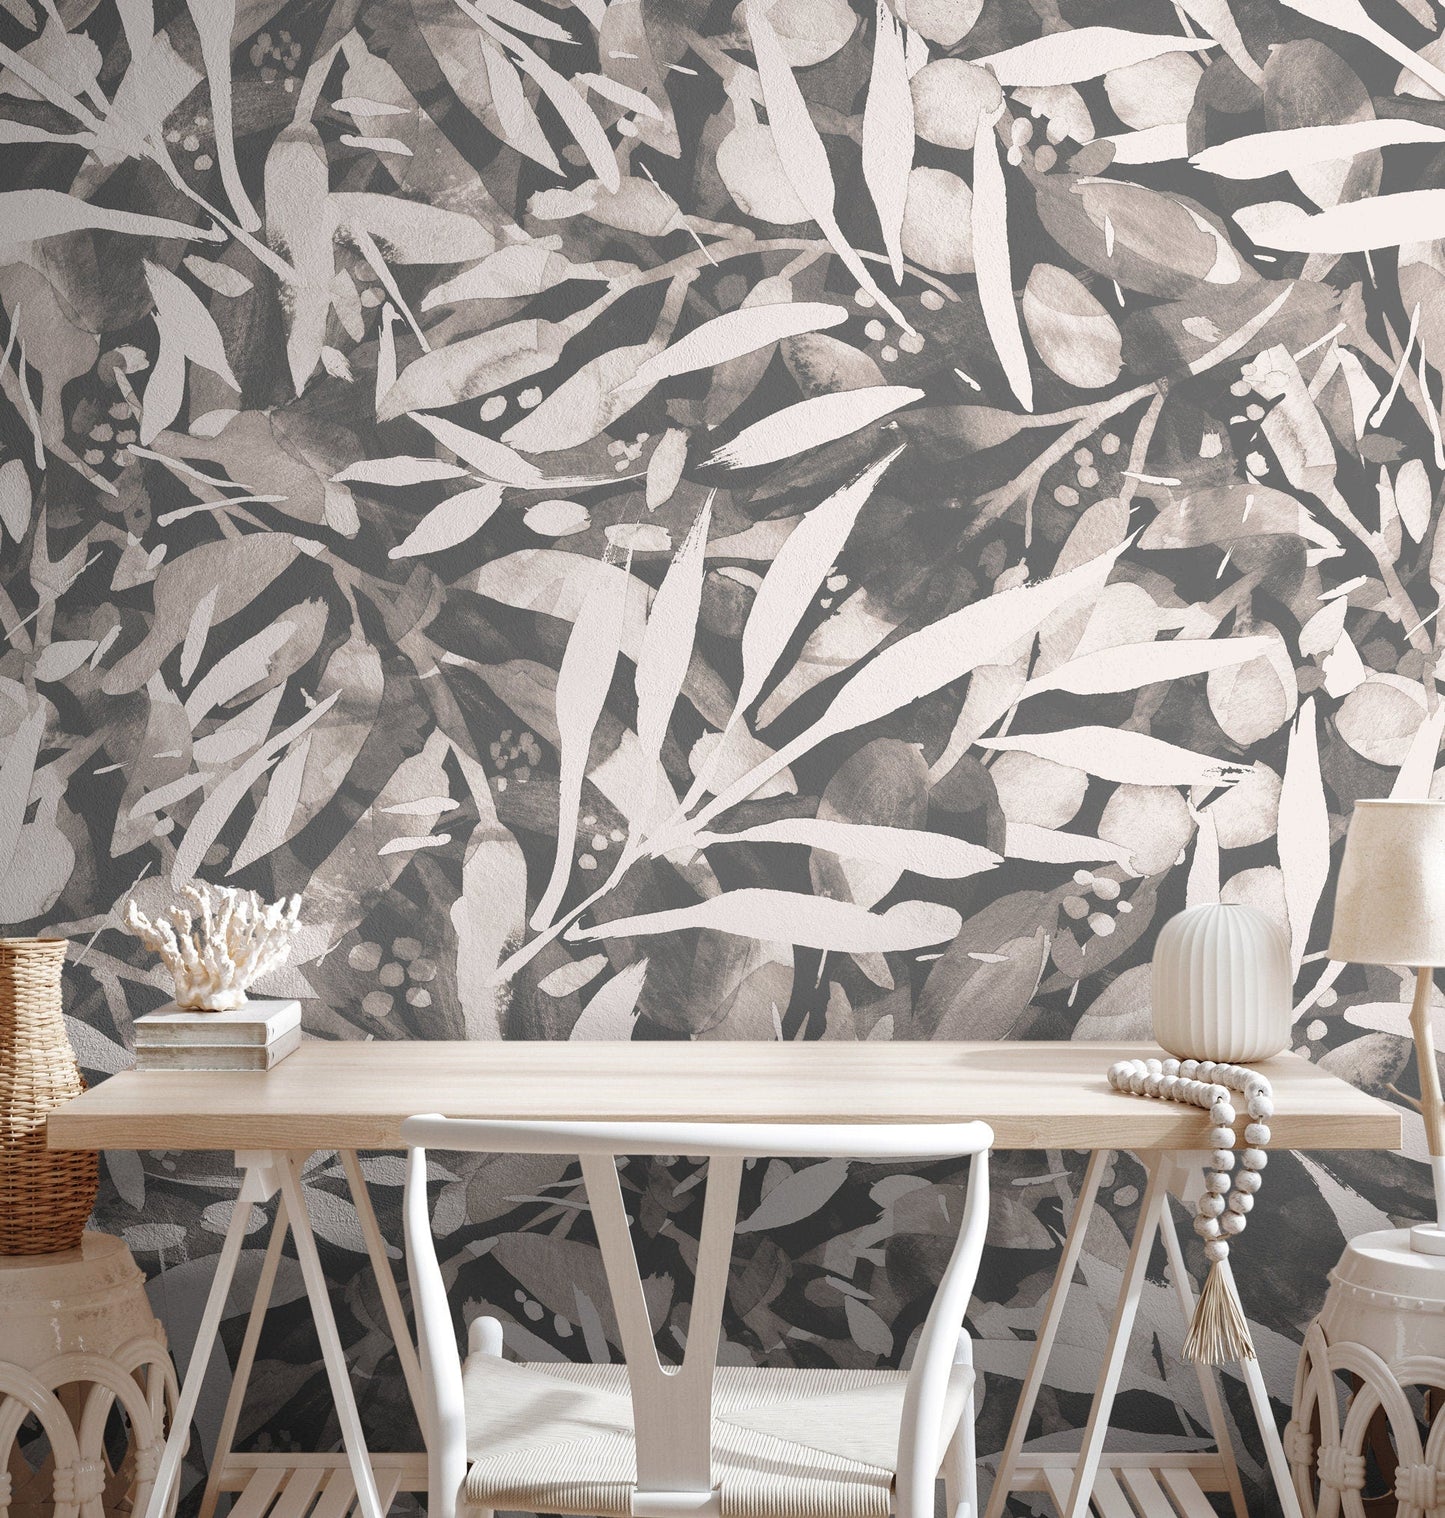 Wallpaper Peel and Stick Wallpaper Removable Wallpaper Home Decor Wall Art Wall Decor Room Decor / Abstract Leaves Wallpaper – X151